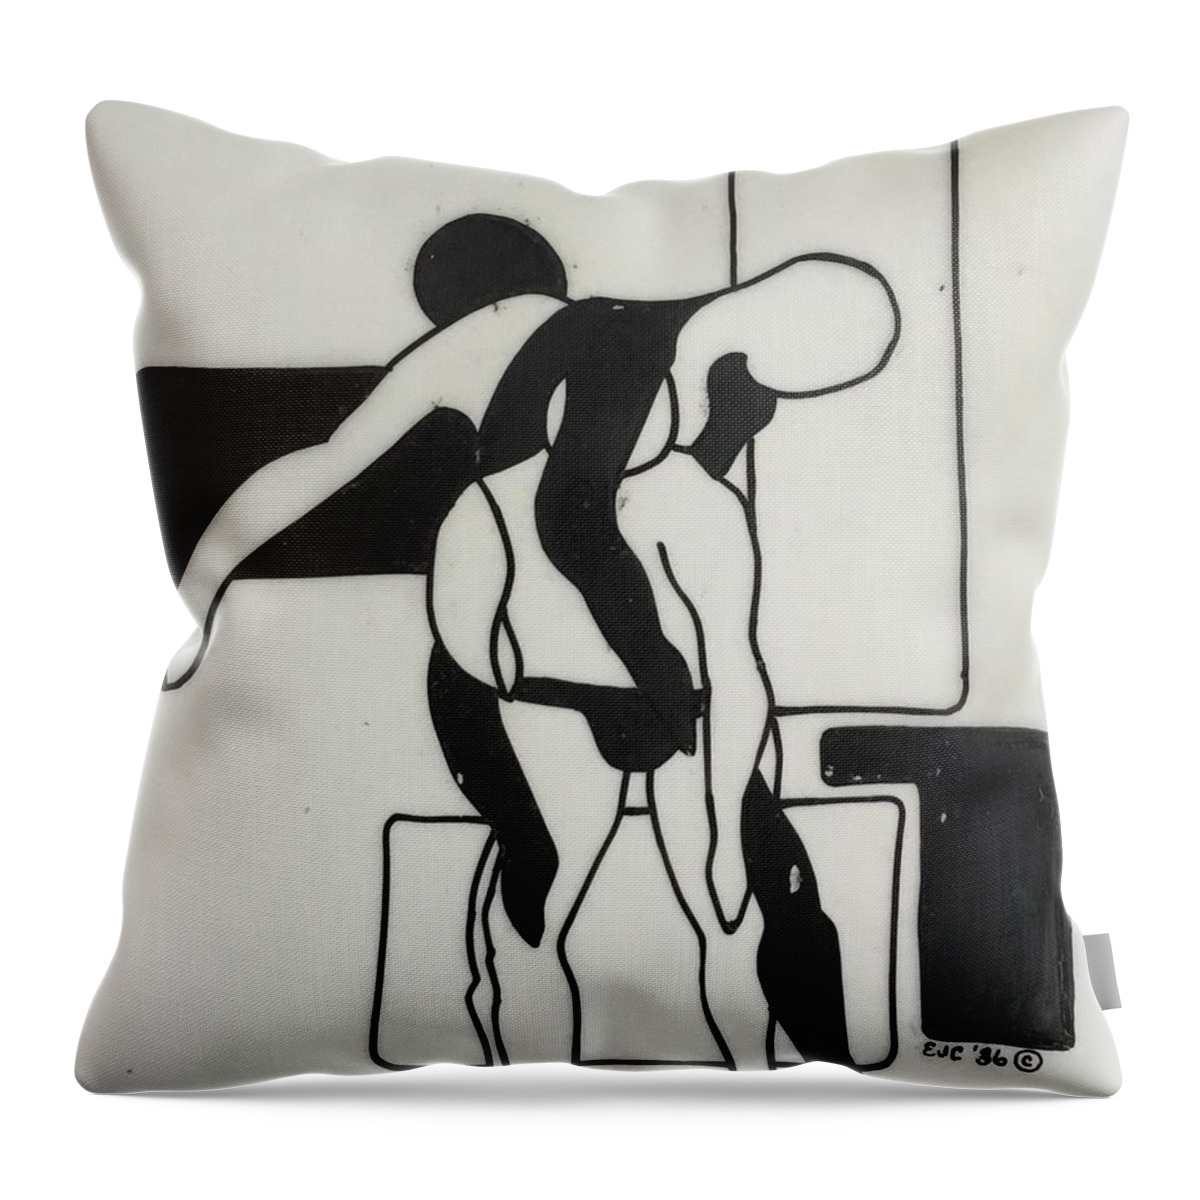 Gymnast Gymnastics Pen And Ink Male Nude Abstract Figures Throw Pillow featuring the drawing Gymnast #1 by Erika Jean Chamberlin